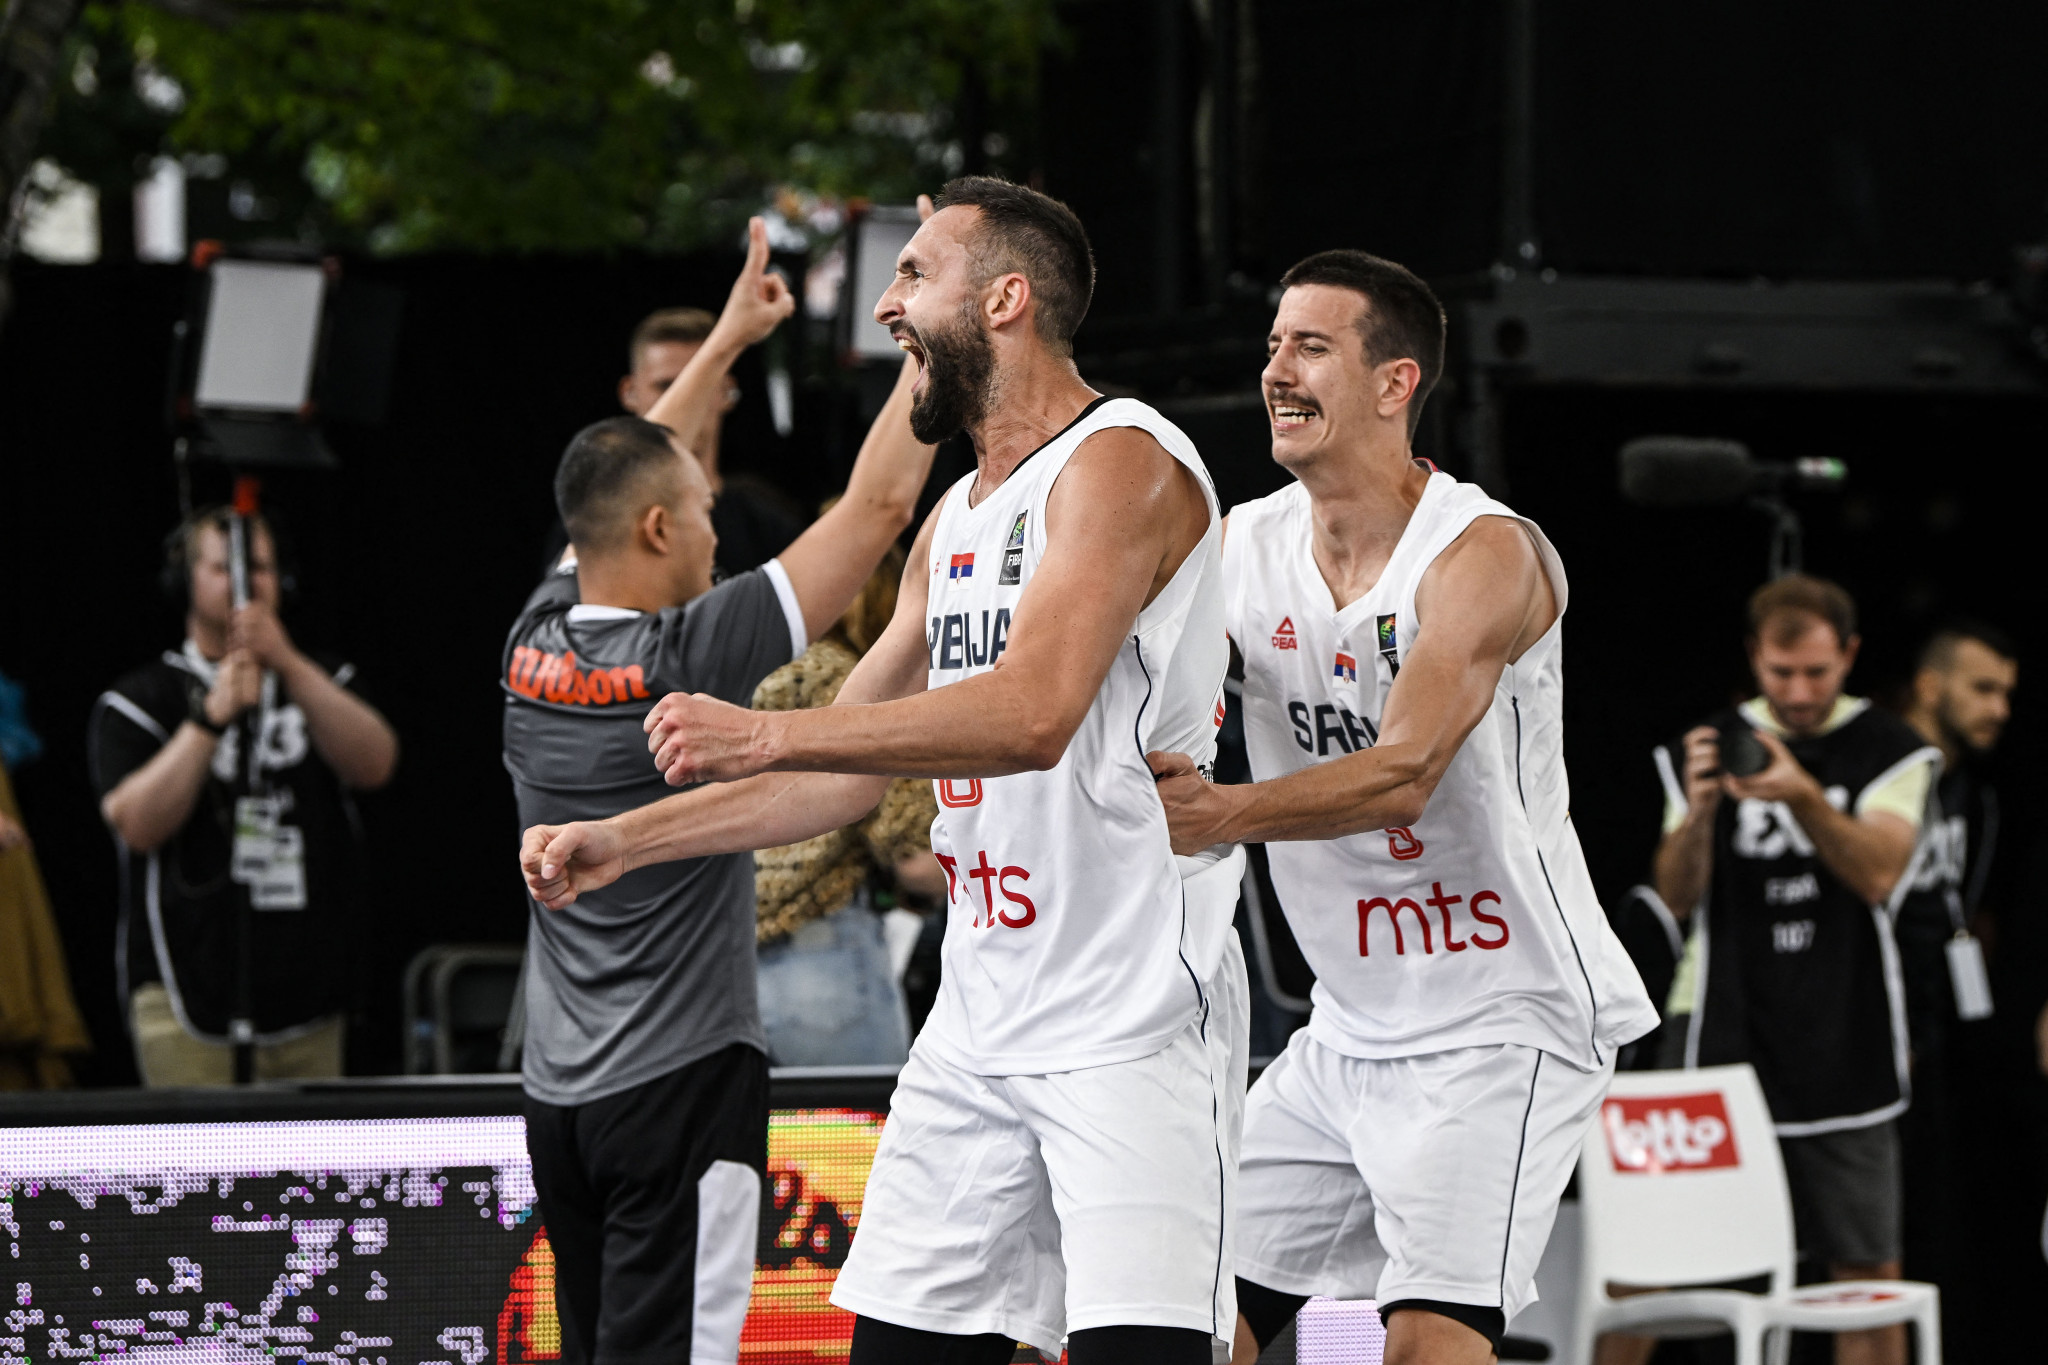 Reigning champions Serbia and Spain advance to FIBA 3x3 Europe Cup quarter-finals in Austria